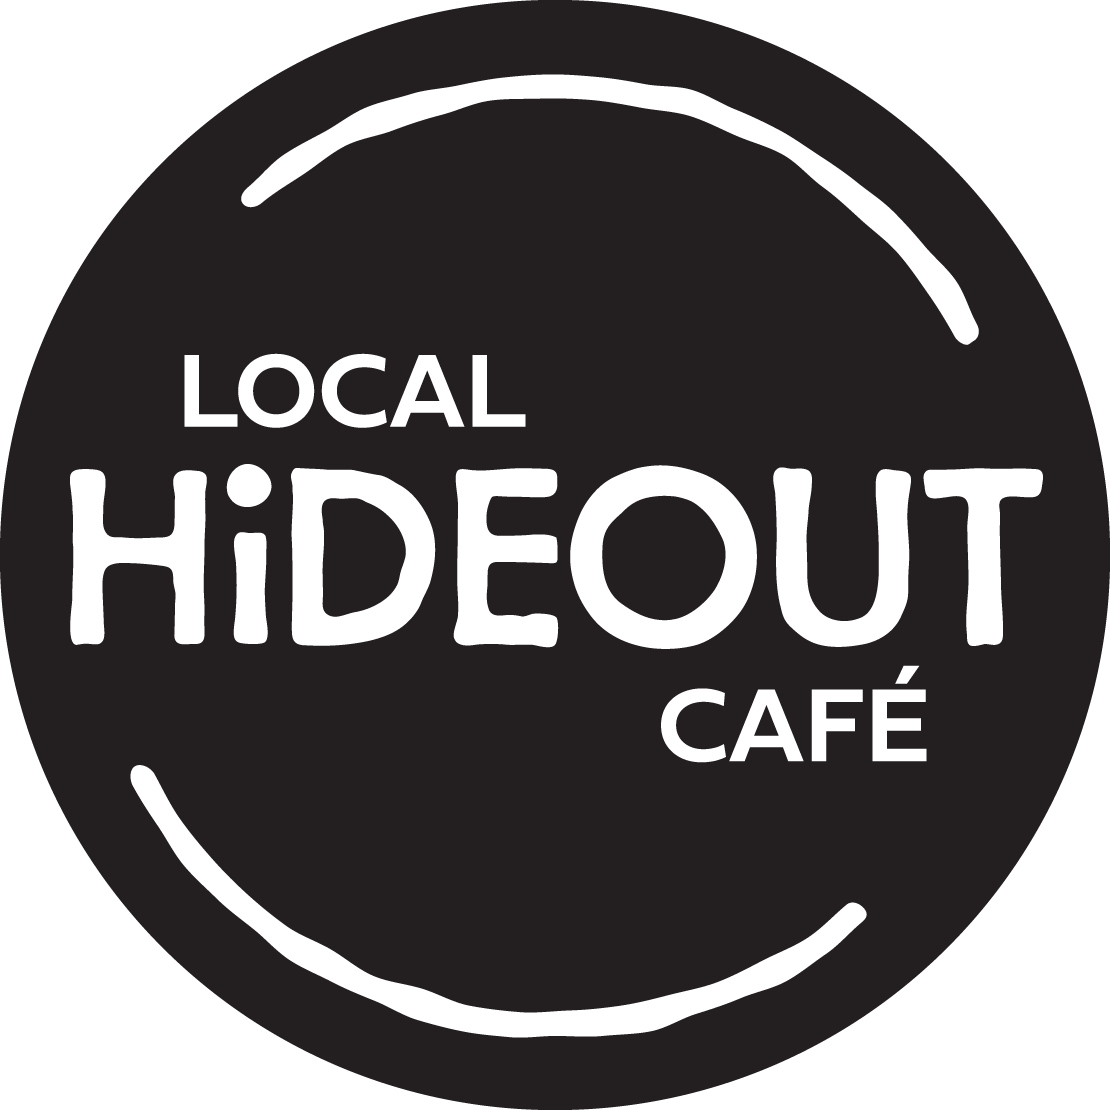 Local Hideout Cafe